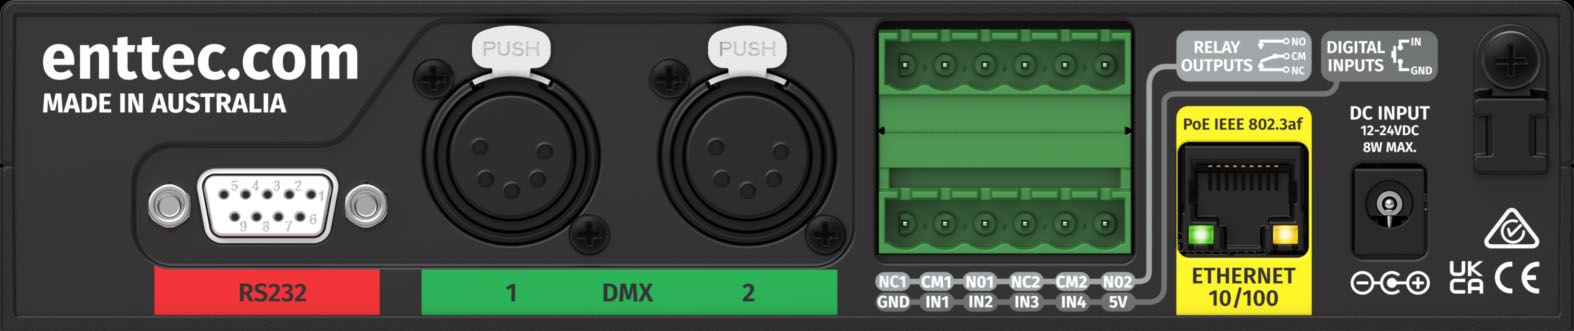 Rear ports of the ENTTEC S-Play DMX, ArtNet and sACN lighting controller with show creation and record functionality. RS232, 5-pin DMX, Dry inputs (GPI) Relay outputs, Power over Ethernet (PoE) and DC input ports.